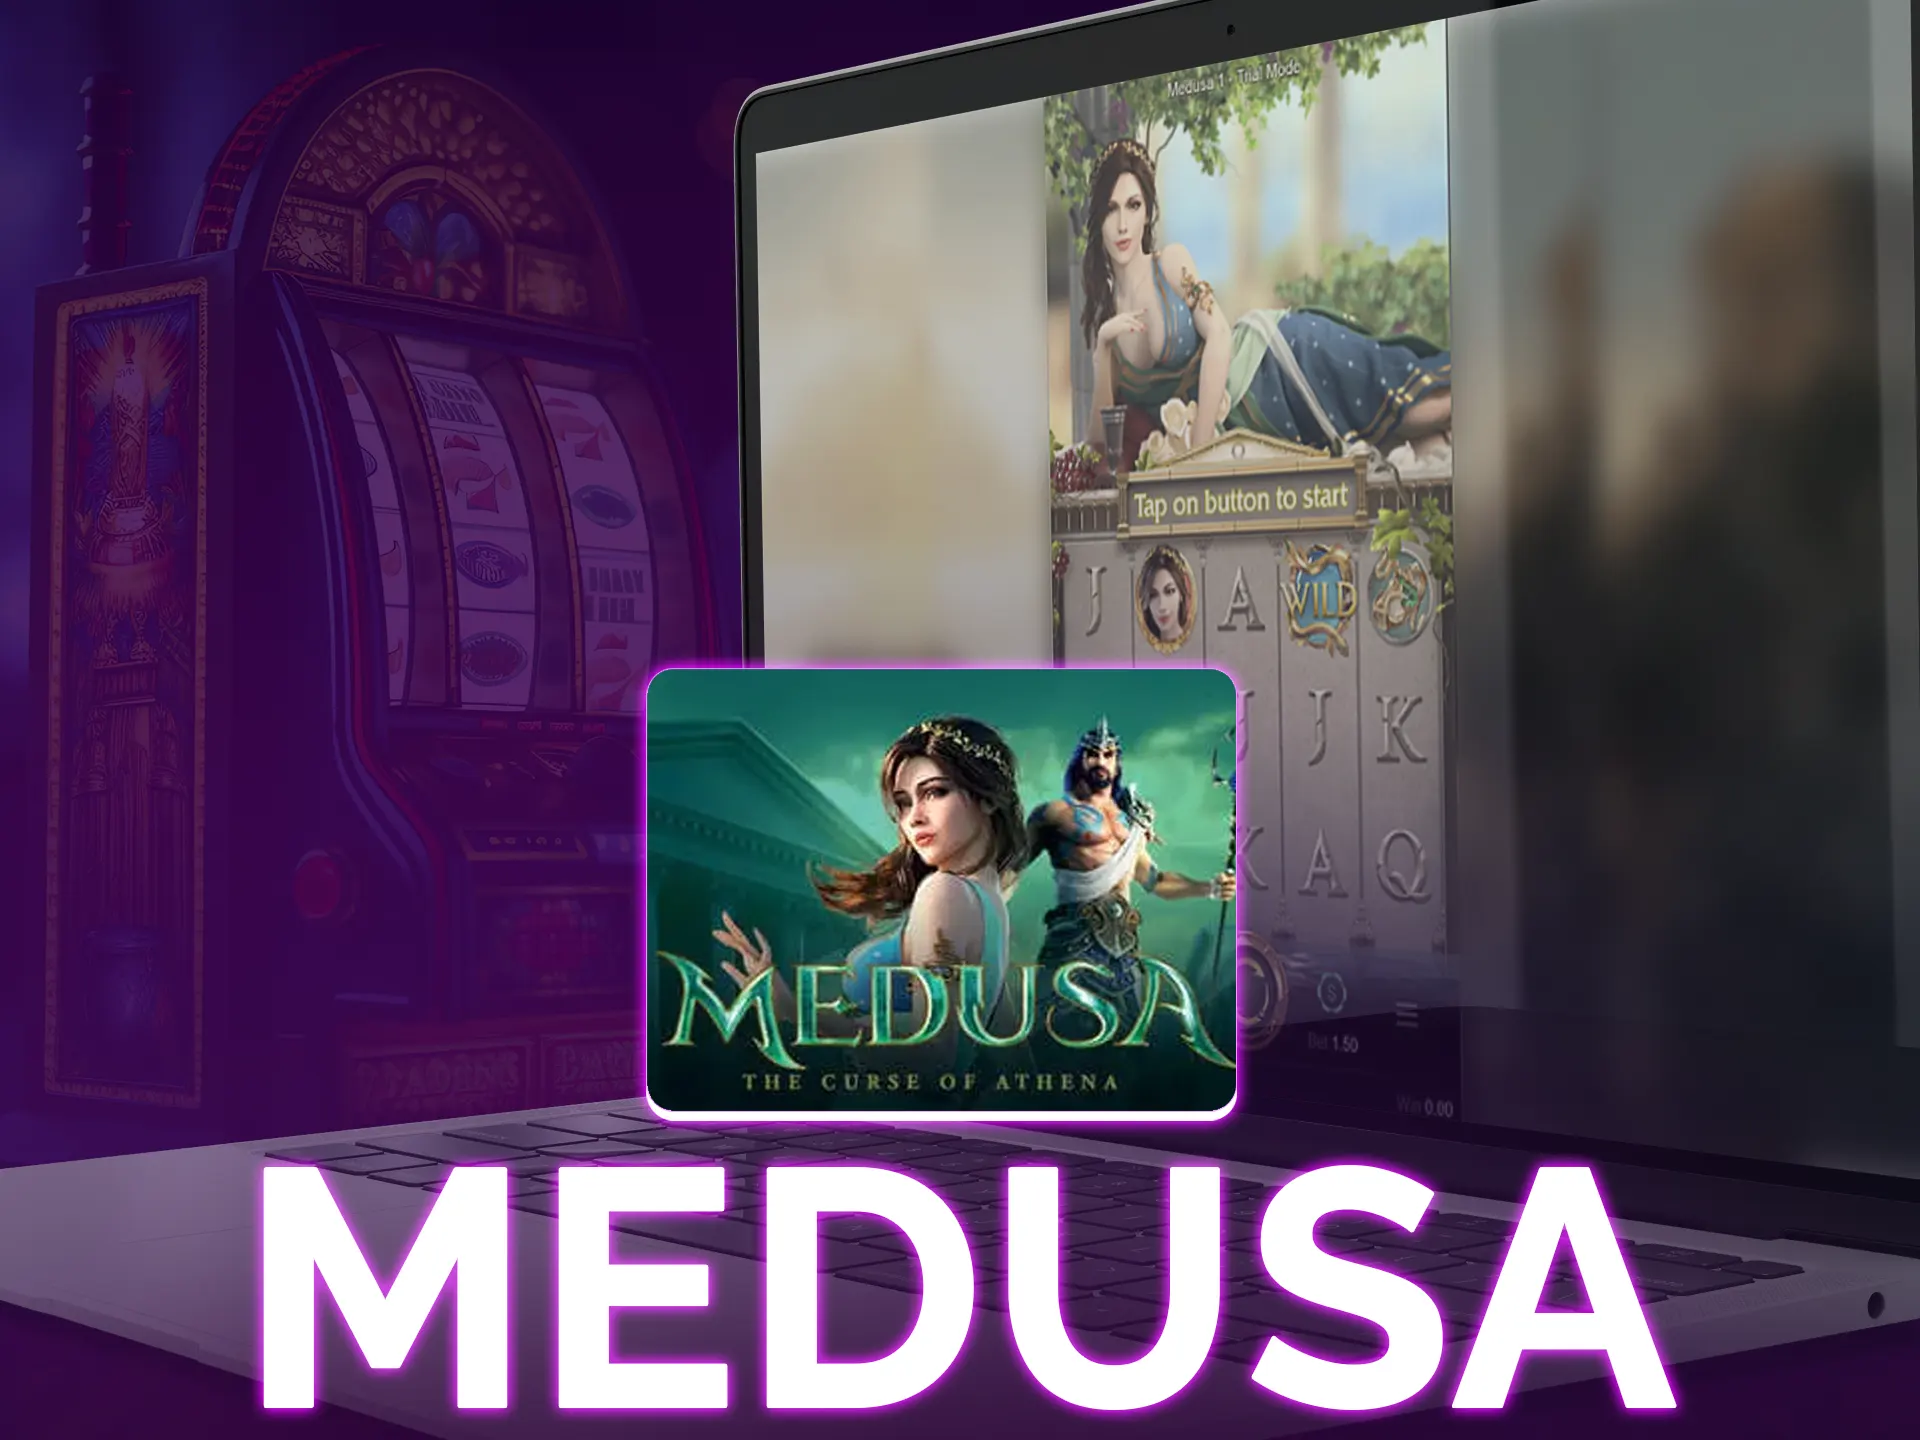 Medusa it`s a greek-themed slot with Medusa, Athena, and free spins on 5 reels.